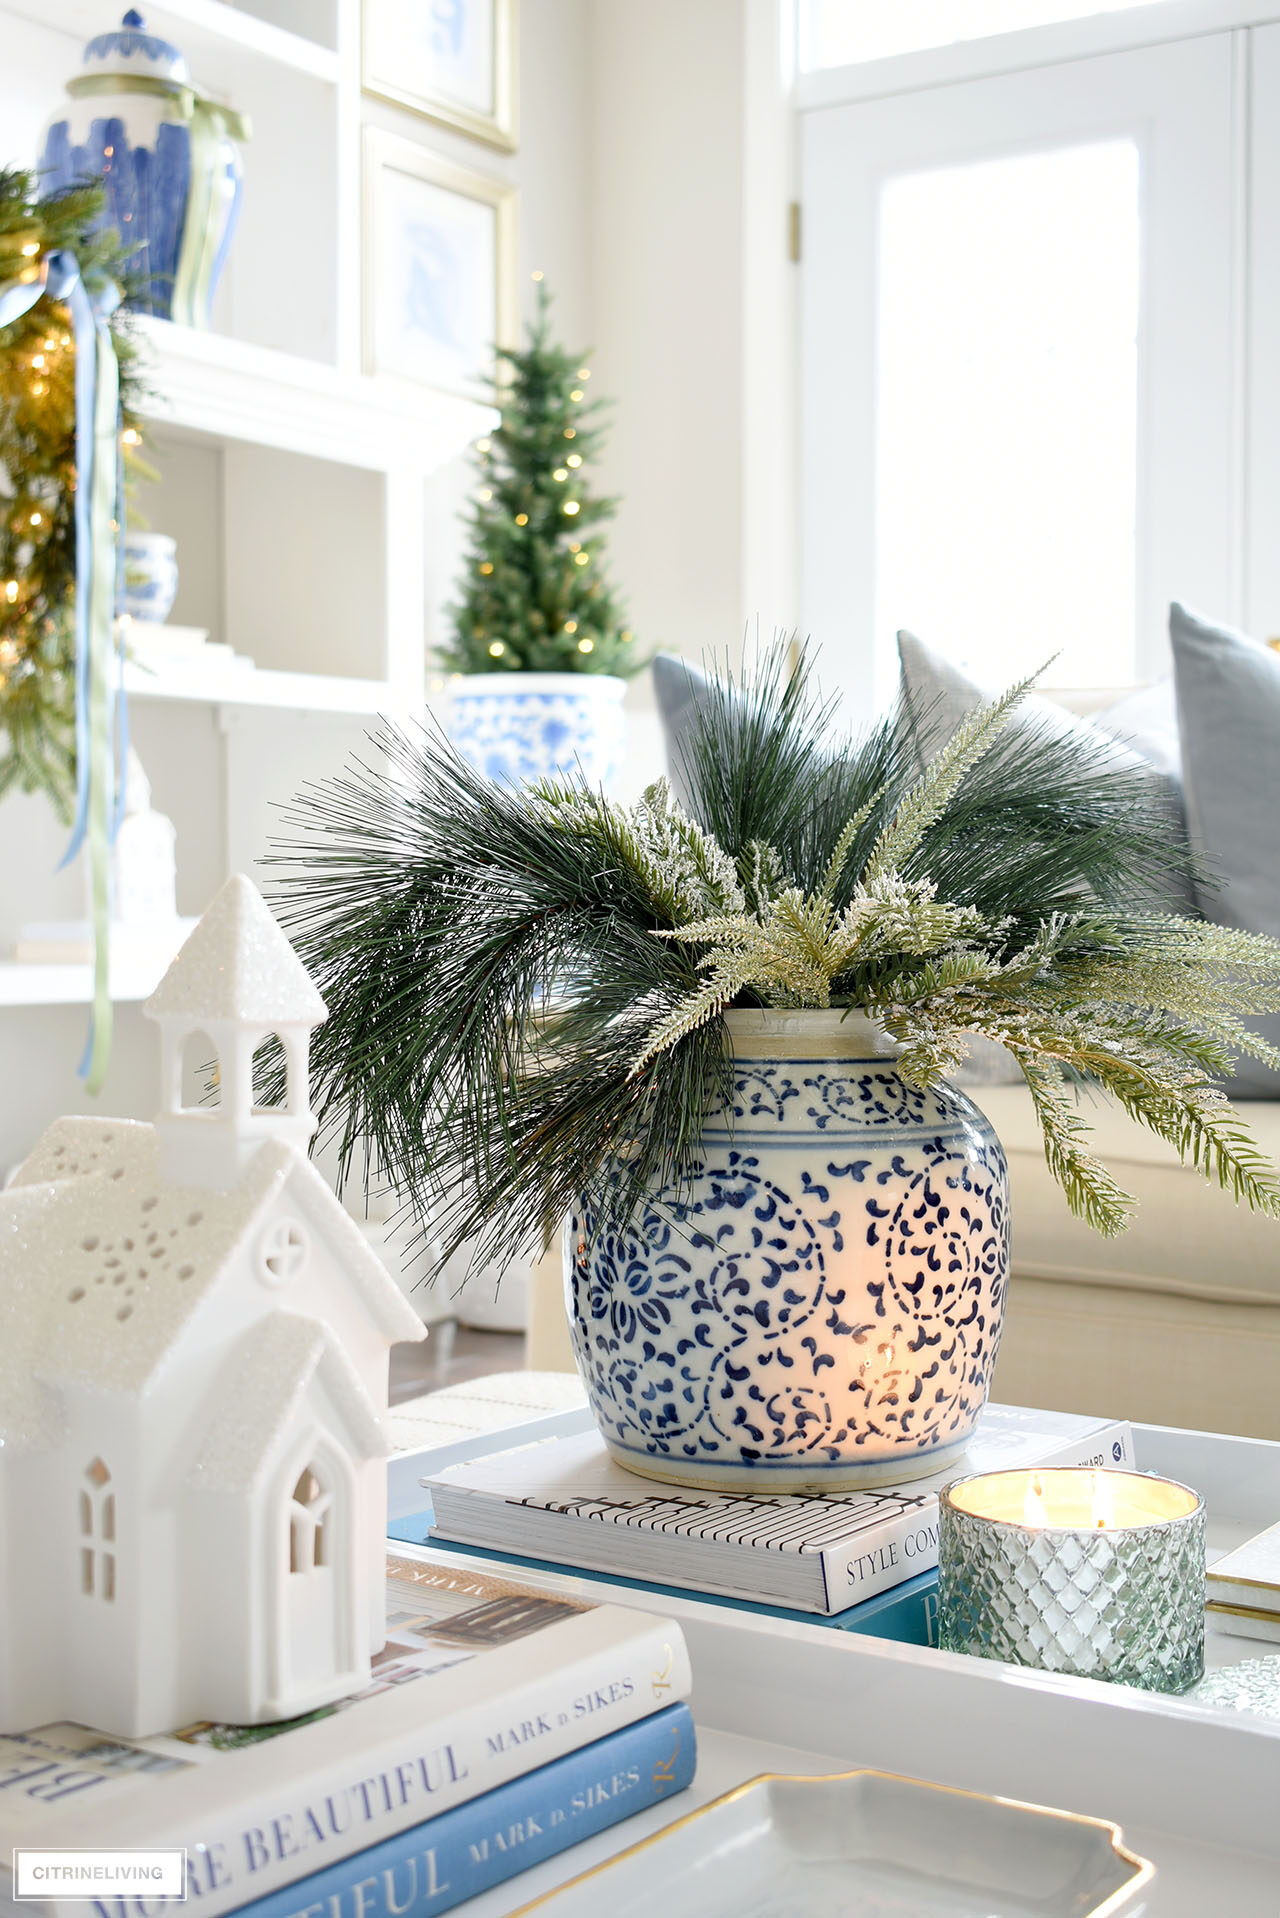 A holiday arrangement with Christmas greenery in a blue and white ginger jar styled with a light green scented candle, white Christmas village church.